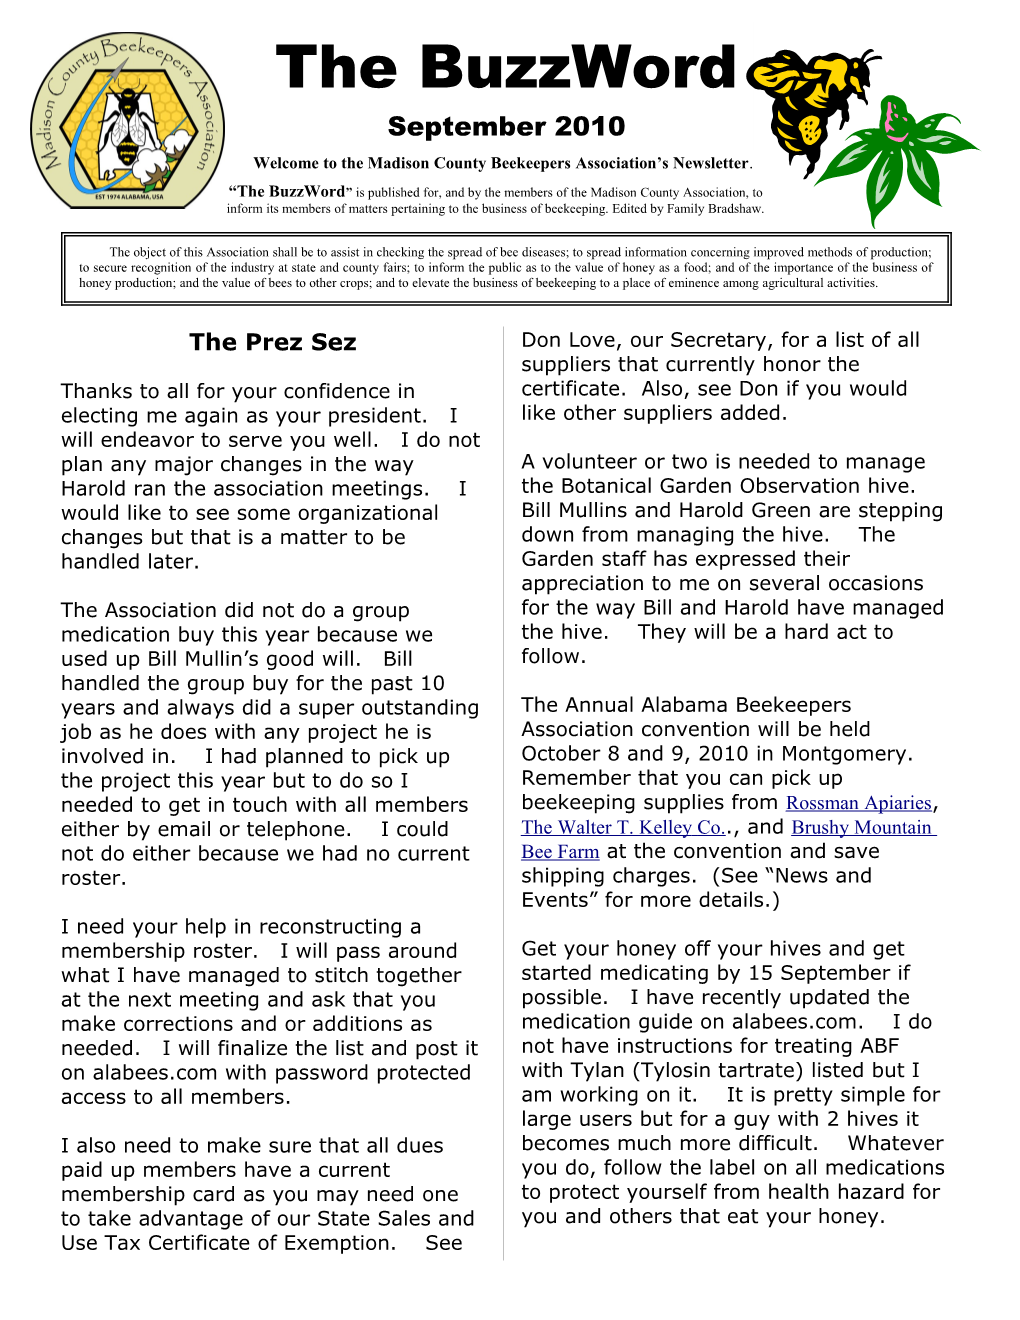 Welcome to the Madison County Beekeepers Association S Newsletter